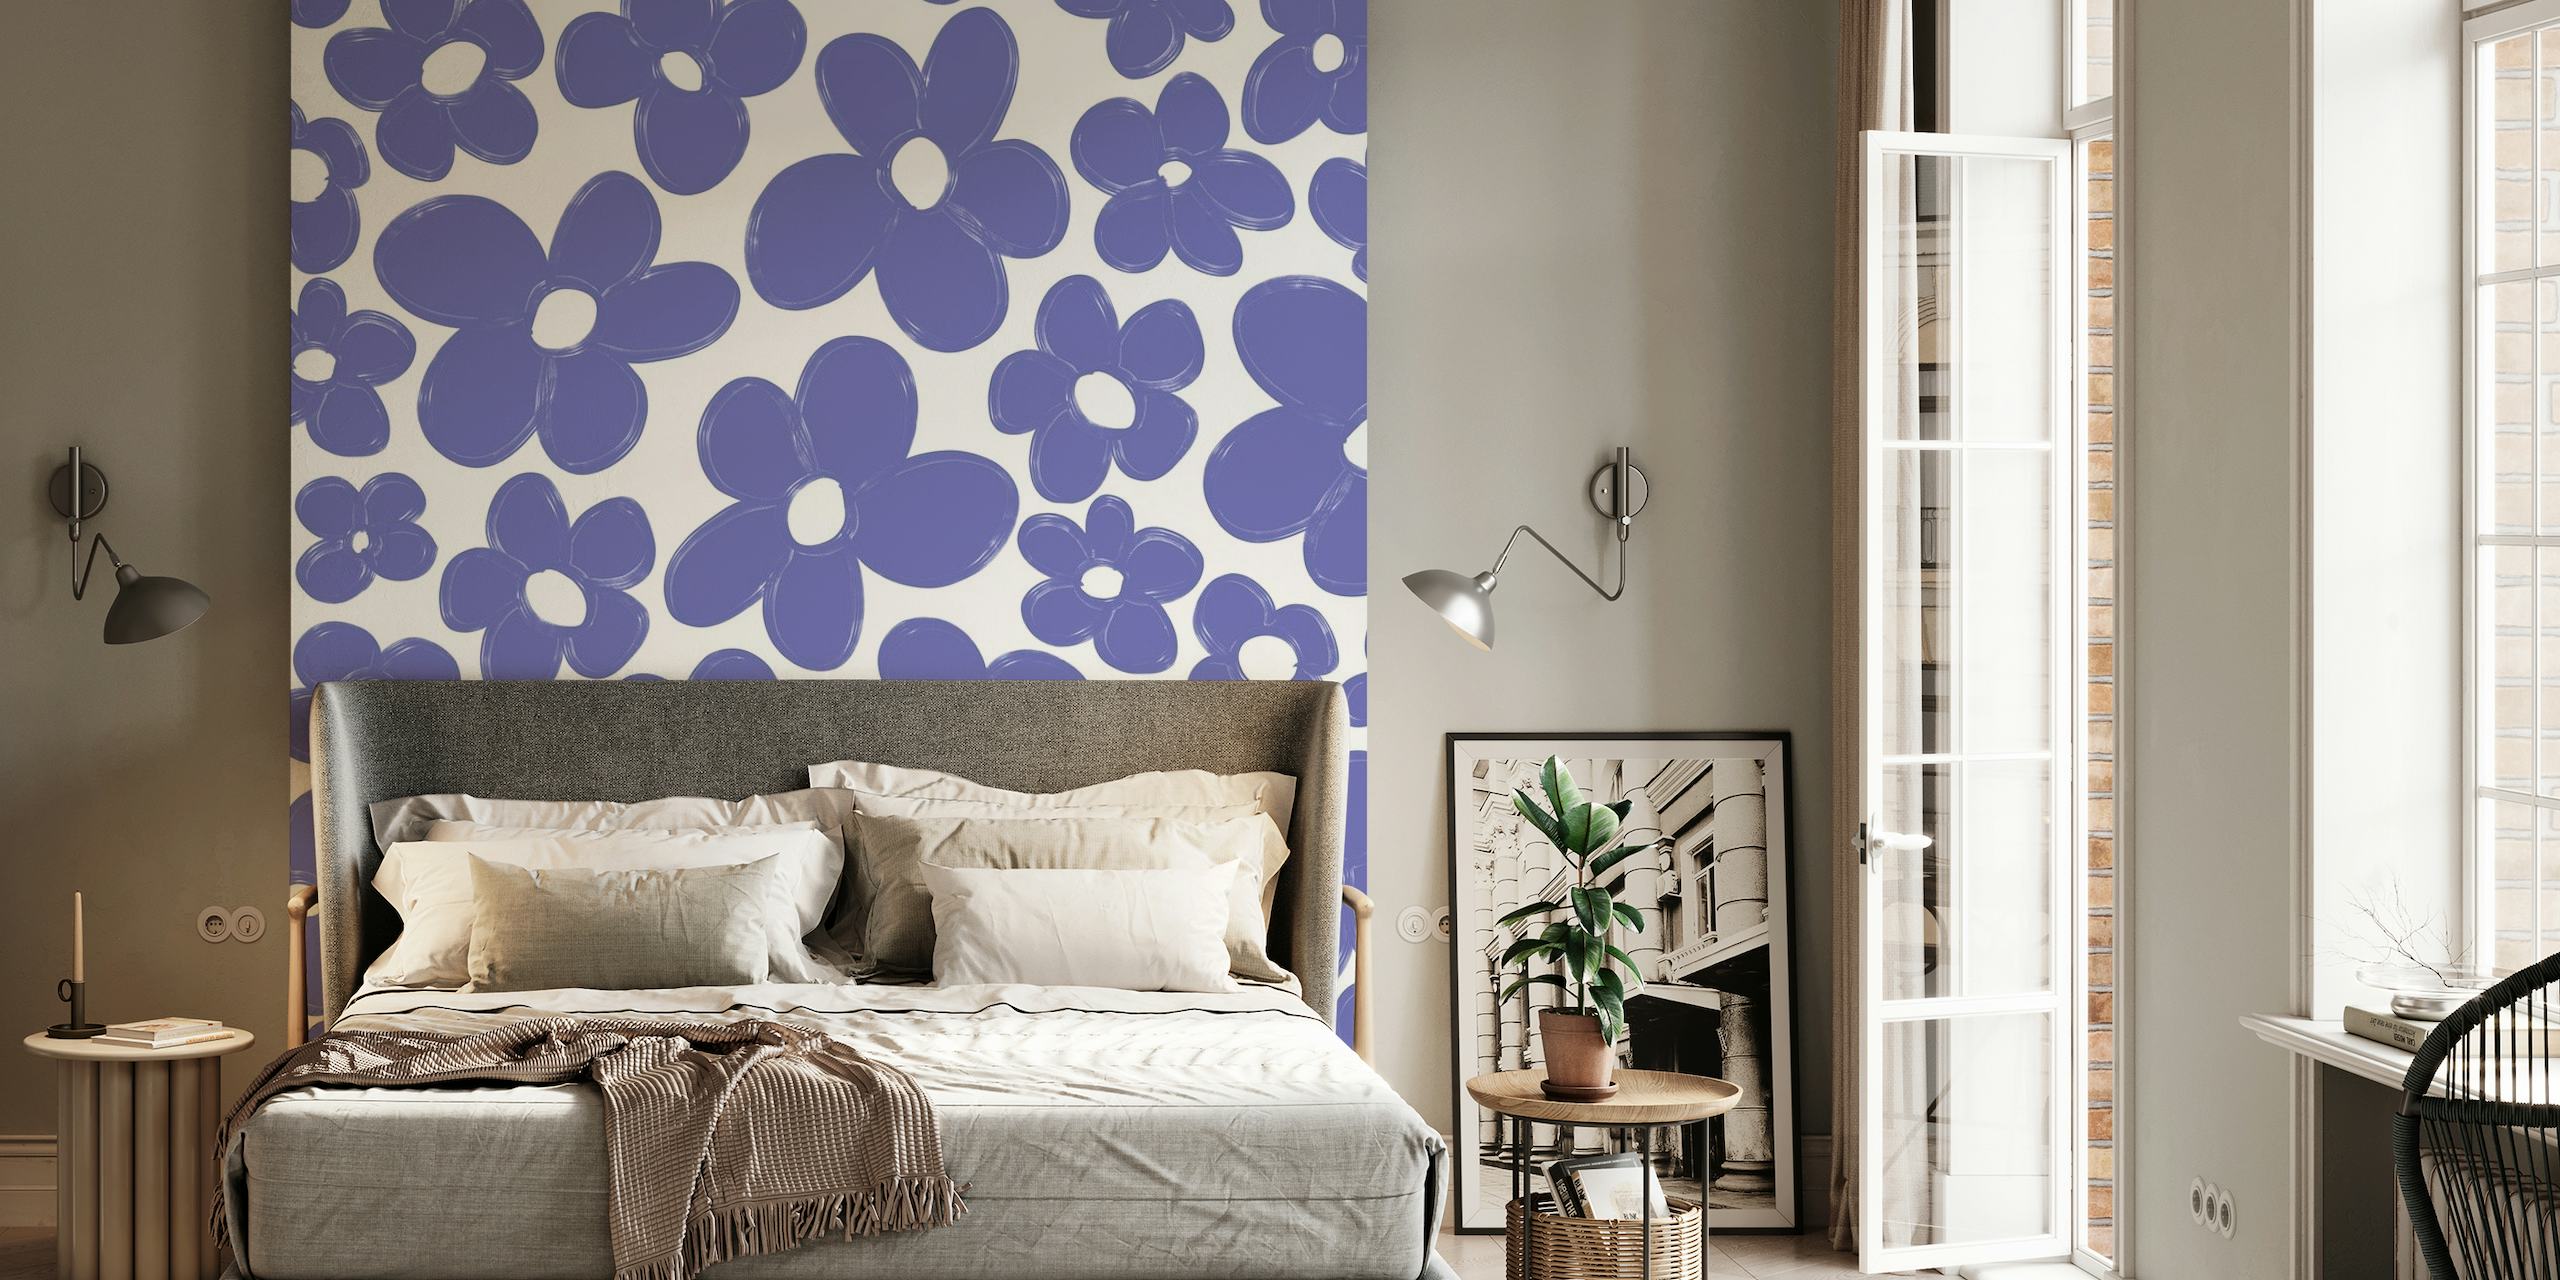 Retro Flowers in Very Peri wall mural with stylized floral patterns